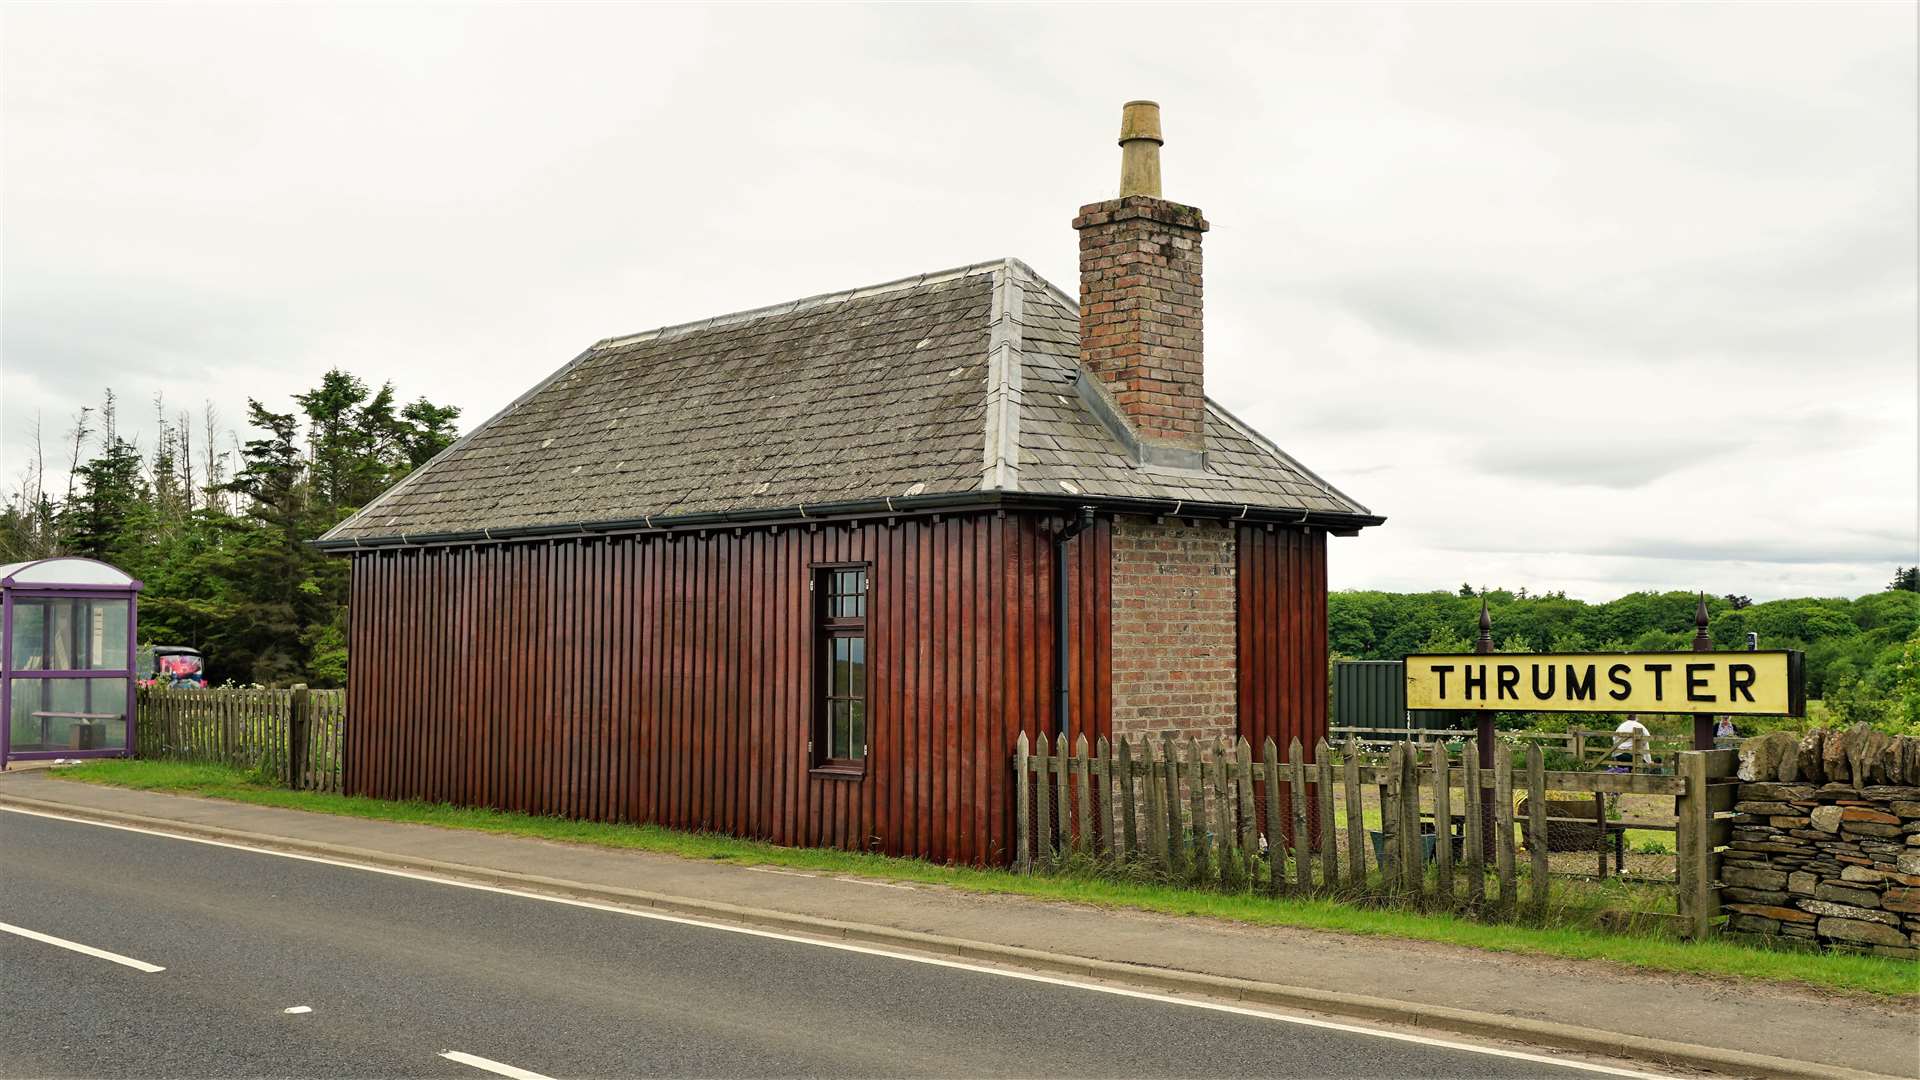 Old Thrumster railway station as seen from the main road that passes it. Picture: DGS